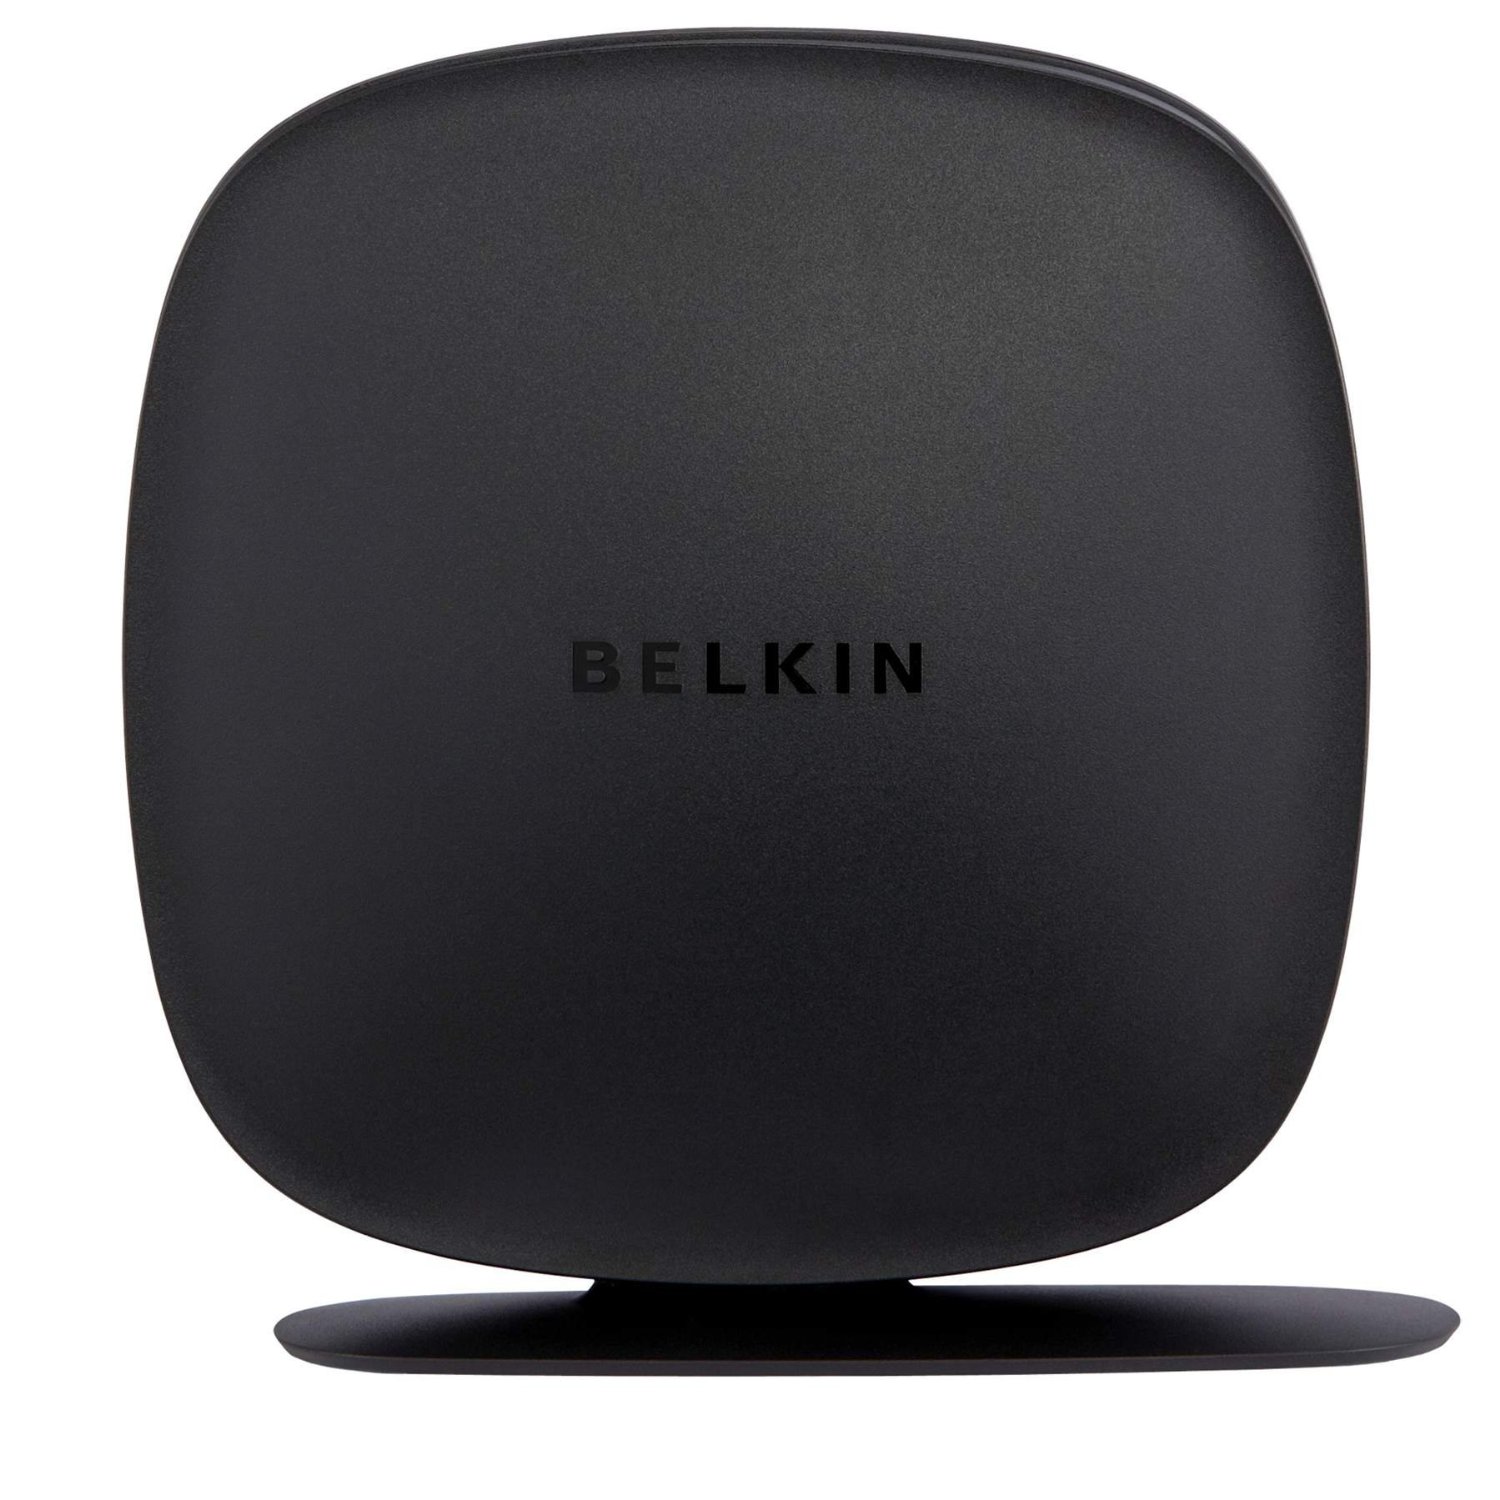 http://thetechjournal.com/wp-content/uploads/images/1108/1314410232-belkin-n150-latest-generation-wireless-n-router-5.jpg